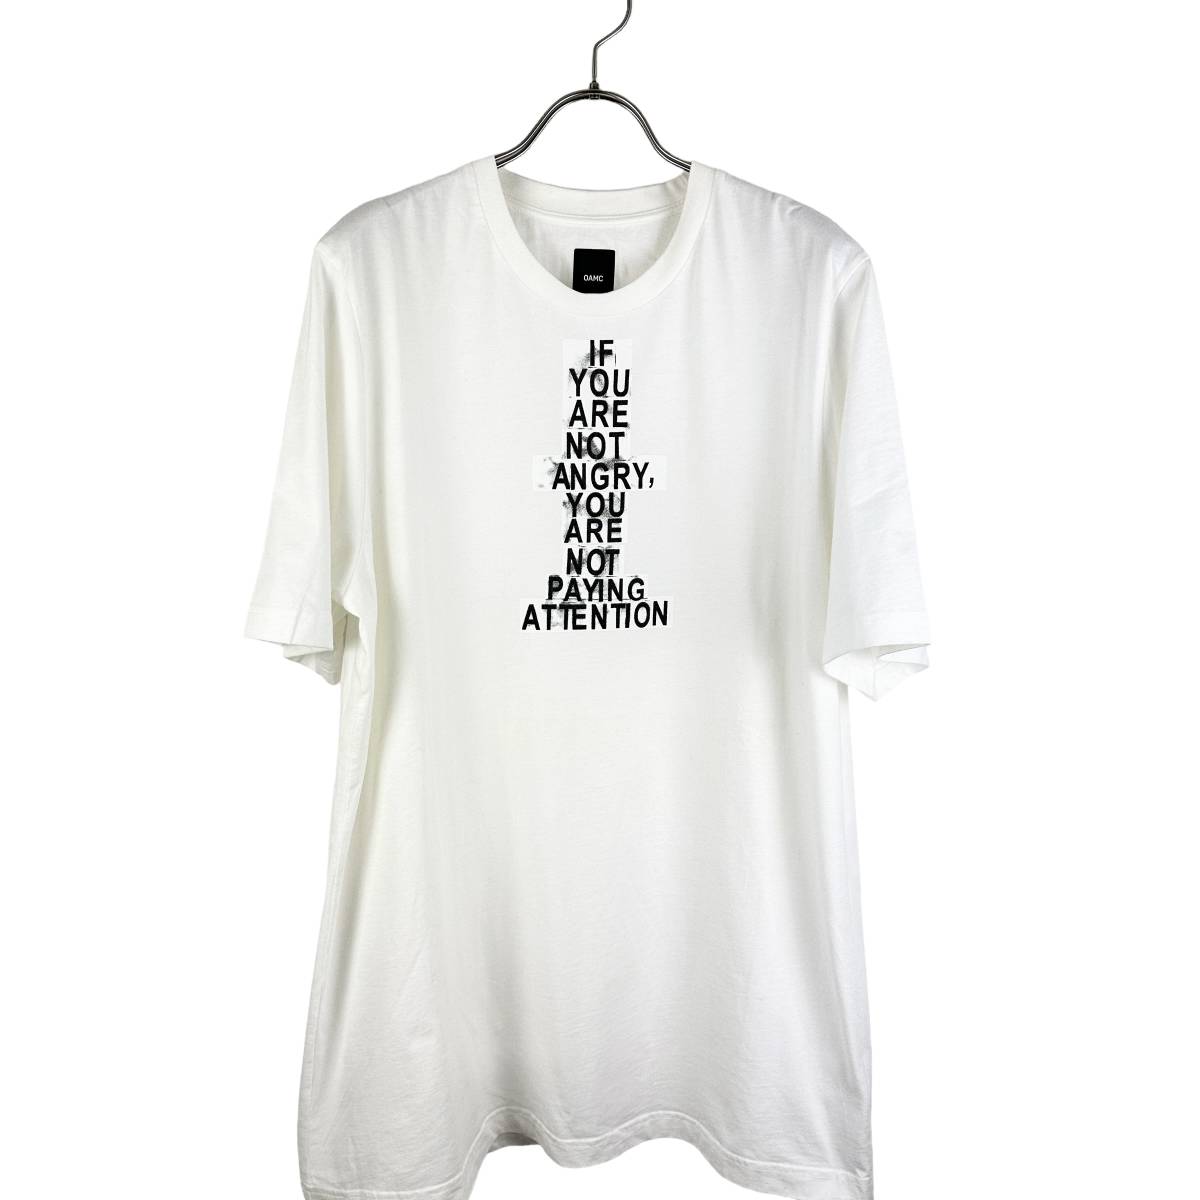 OAMC(オーエーエムシー) ANGRY PAYING ATTENTION T Shirt (white) Yahoo!フリマ（旧）のサムネイル